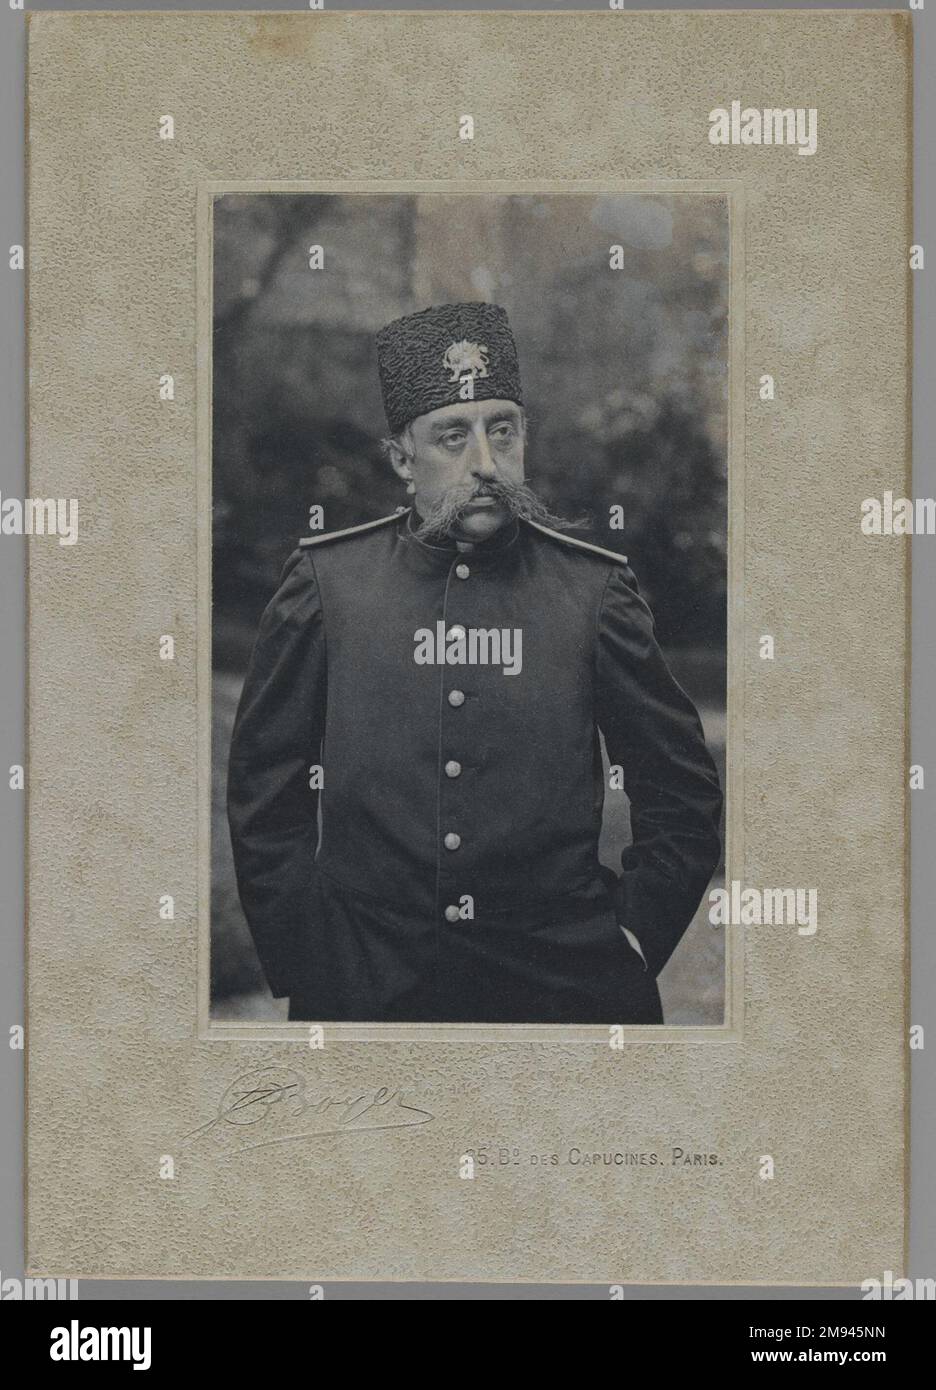 A Carte de Visite with Portrait of Mozaffar al-Din Shah , One of 274 Vintage Photographs , late 19th-early 20th century. Gelatin silver printing out paper mounted on carte de visite, Photograph: 3 13/16 x 2 7/16 in. (9.7 x 6.2 cm).   Arts of the Islamic World late 19th-early 20th century Stock Photo